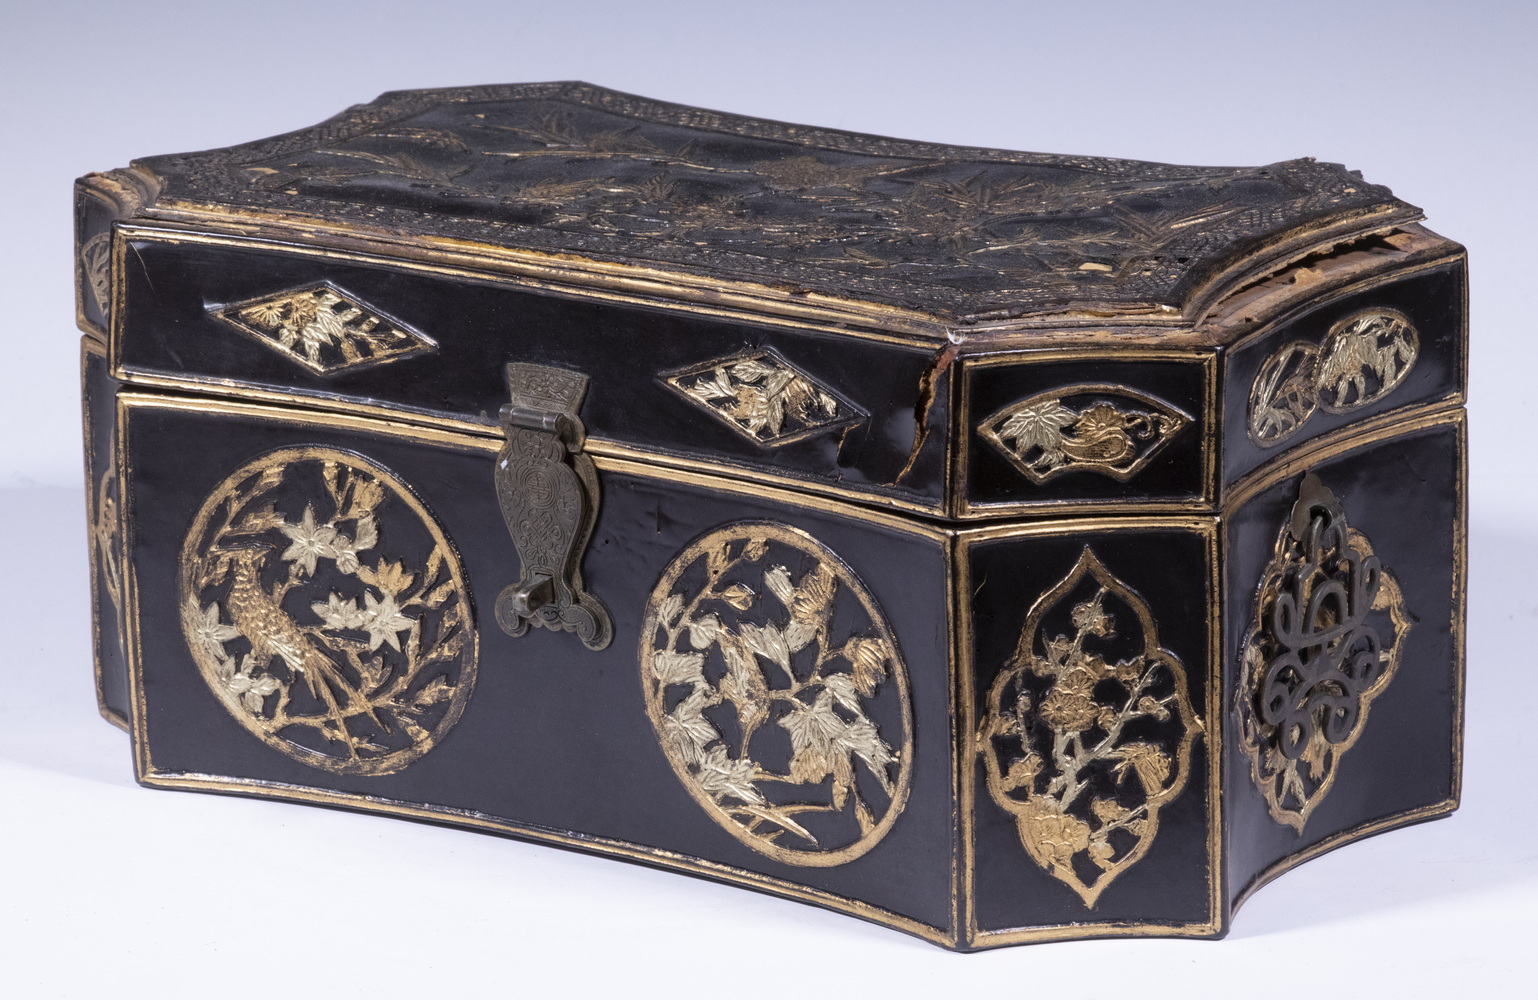 CHINESE EXPORT GILT DECORATED BLACK